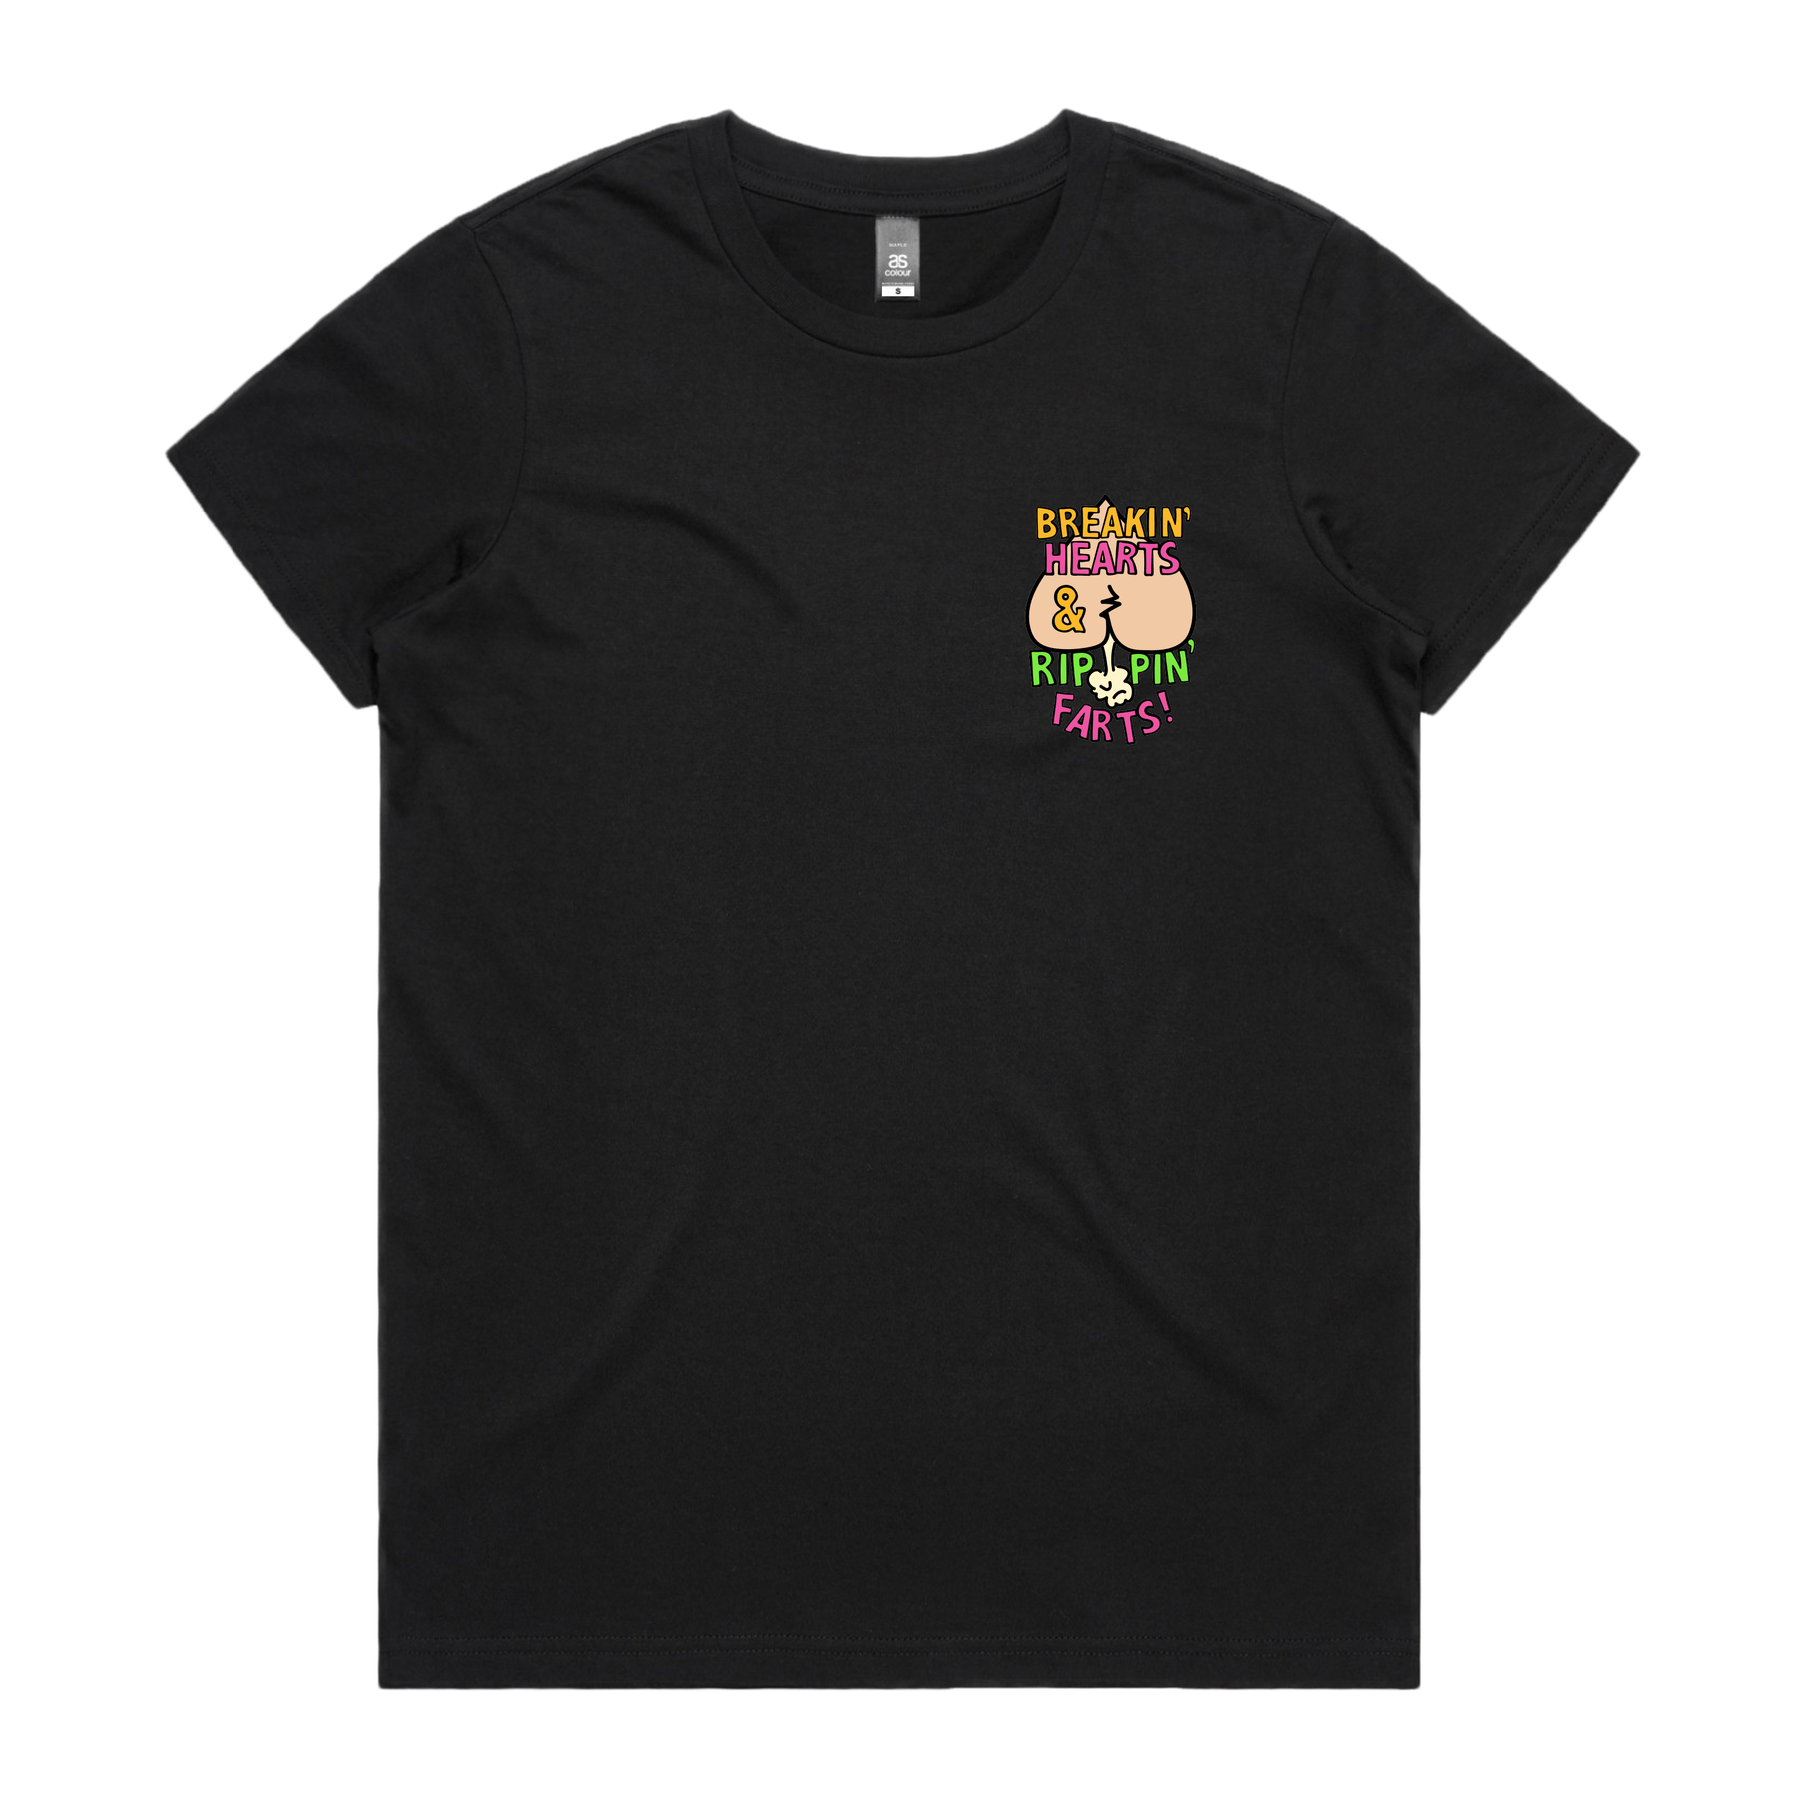 XS / Black / Small Front Design Rippin Farts 💔💨 - Women's T Shirt